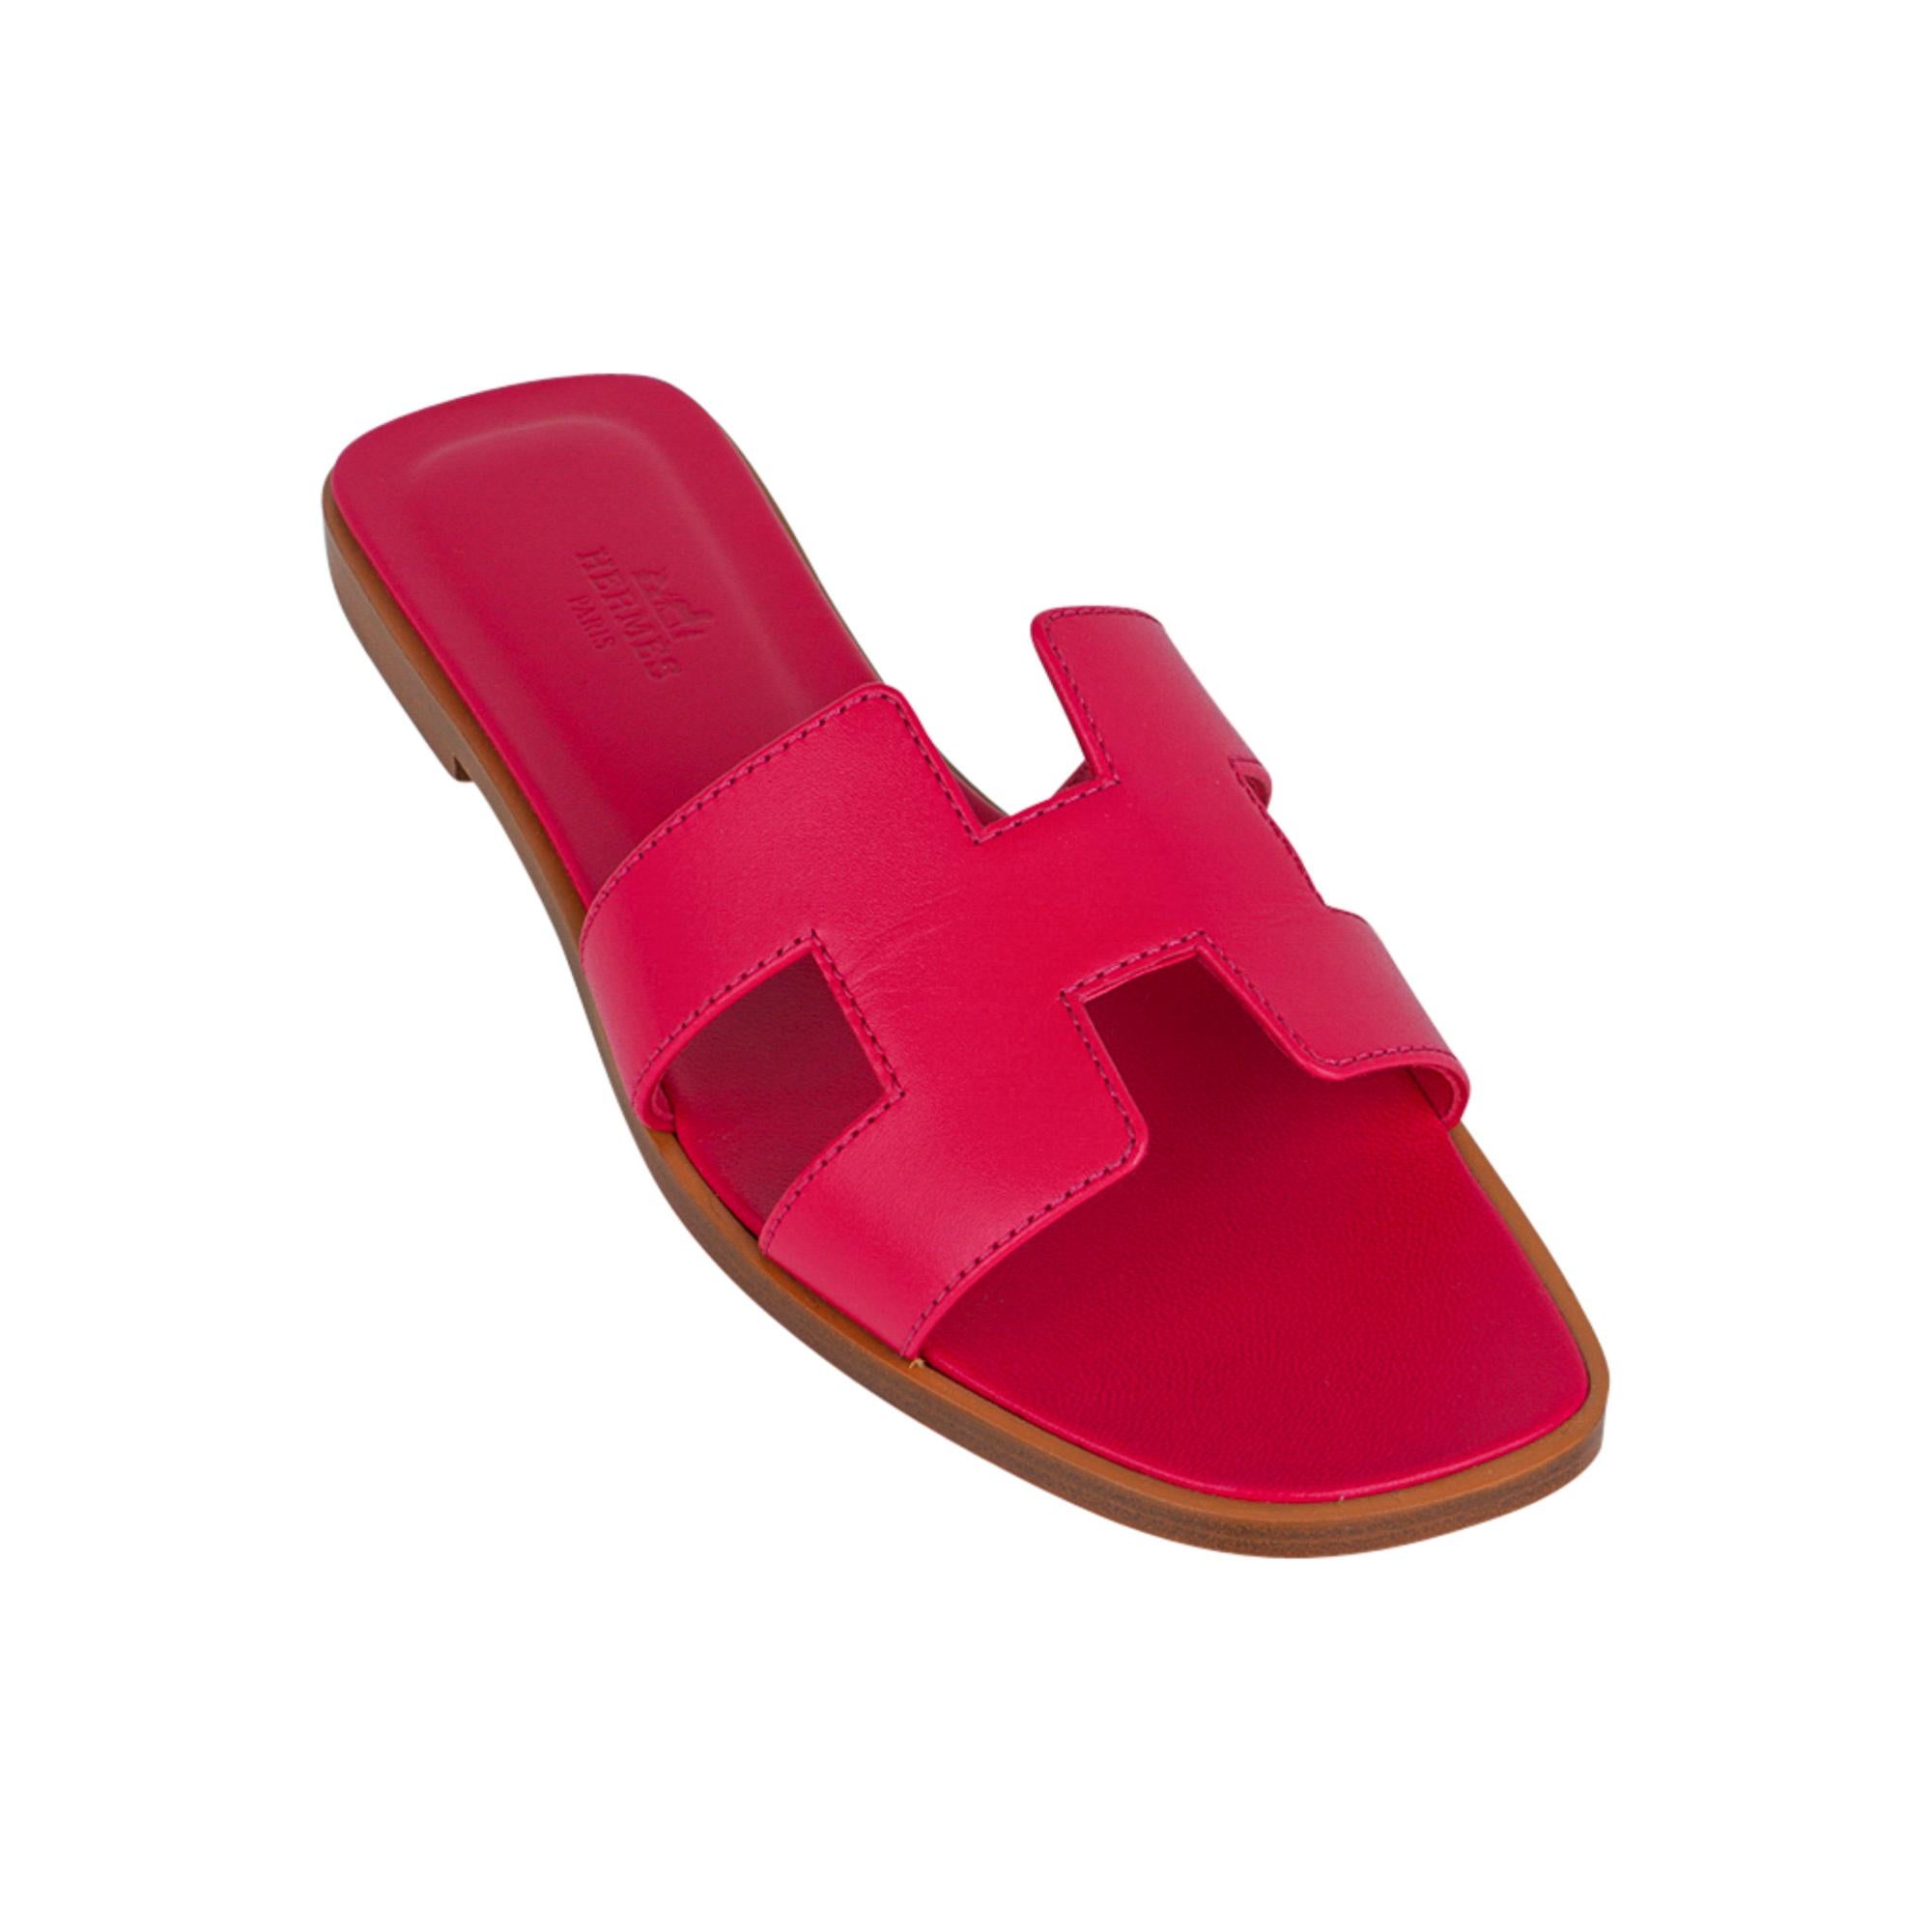 Mightychic offers guaranteed authentic Hermes Oran Rose Sorbet  pink flat sandal.
These rich, saturated pink slides are a must for foot flirting!
Hermes Paris embossed Rose Sorbet leather insole.
Wood heel with leather sole.
Comes with sleepers,